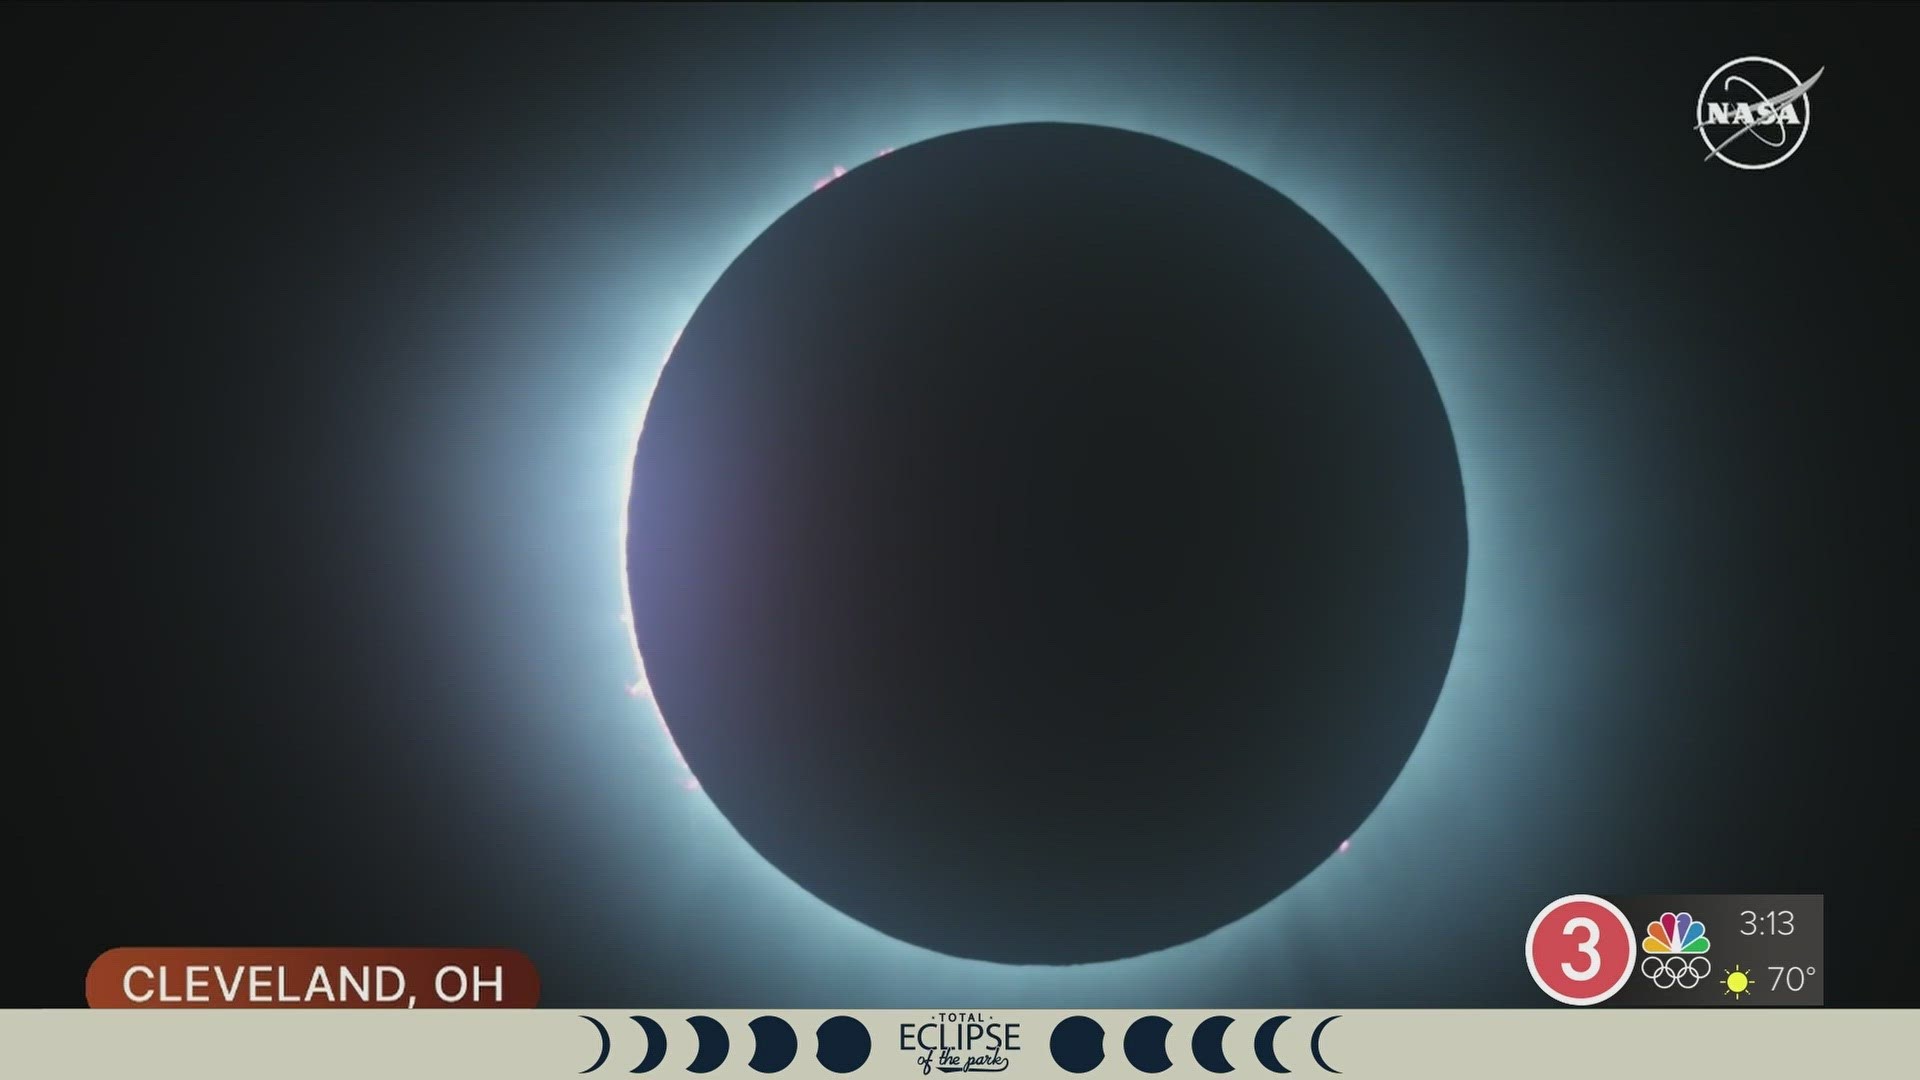 What an amazing sight! The 3News team watched it live with you during our "Total Eclipse of the Park" show.